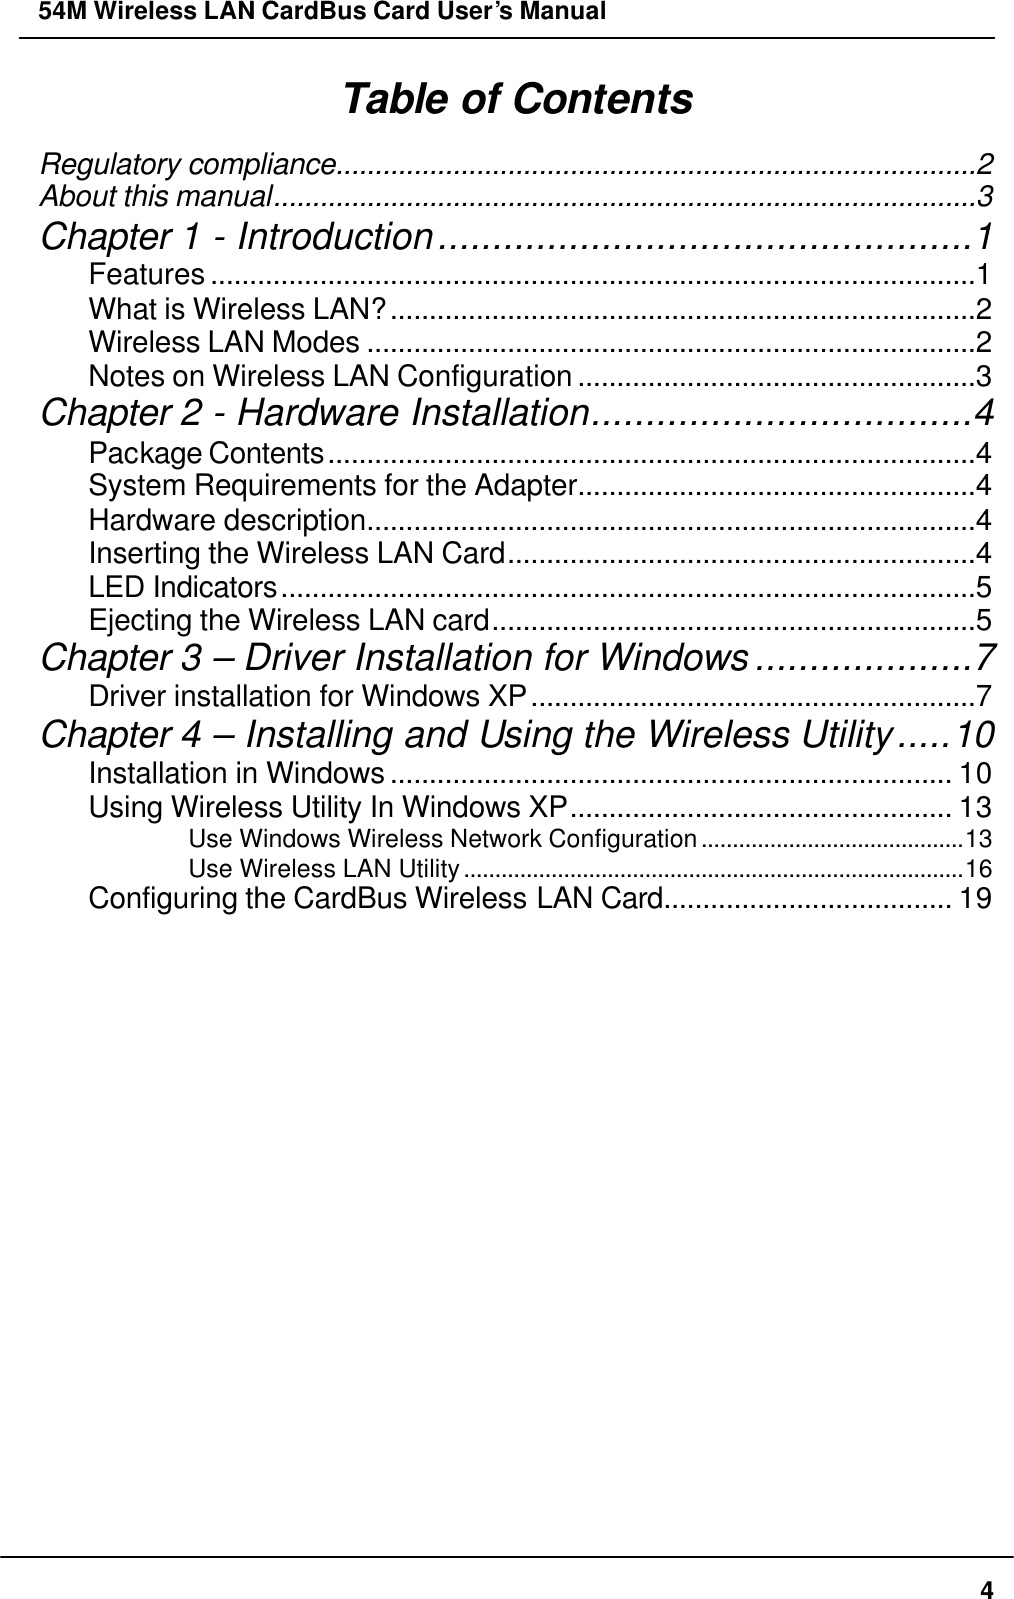 54M Wireless LAN CardBus Card User’s Manual  4 Table of Contents Regulatory compliance..................................................................................2 About this manual..........................................................................................3 Chapter 1 - Introduction.................................................1 Features ..................................................................................................1 What is Wireless LAN?...........................................................................2 Wireless LAN Modes ..............................................................................2 Notes on Wireless LAN Configuration ...................................................3 Chapter 2 - Hardware Installation...................................4 Package Contents...................................................................................4 System Requirements for the Adapter...................................................4 Hardware description..............................................................................4 Inserting the Wireless LAN Card............................................................4 LED Indicators.........................................................................................5 Ejecting the Wireless LAN card..............................................................5 Chapter 3 – Driver Installation for Windows ....................7 Driver installation for Windows XP.........................................................7 Chapter 4 – Installing and Using the Wireless Utility.....10 Installation in Windows ........................................................................ 10 Using Wireless Utility In Windows XP................................................. 13 Use Windows Wireless Network Configuration..........................................13 Use Wireless LAN Utility................................................................................16 Configuring the CardBus Wireless LAN Card..................................... 19 